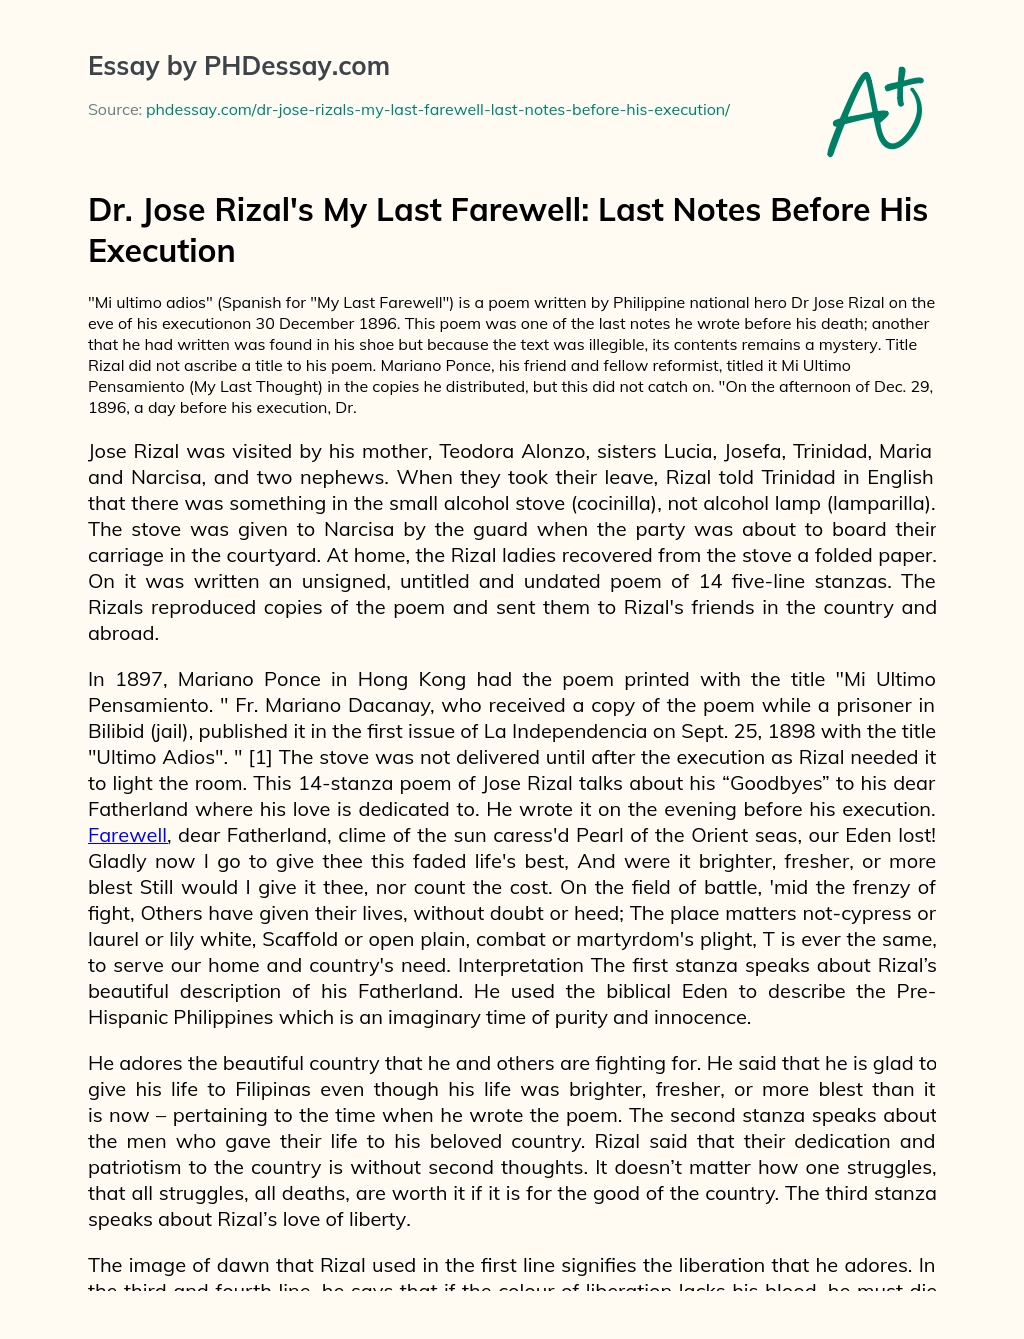 Dr. Jose Rizal’s My Last Farewell: Last Notes Before His Execution essay